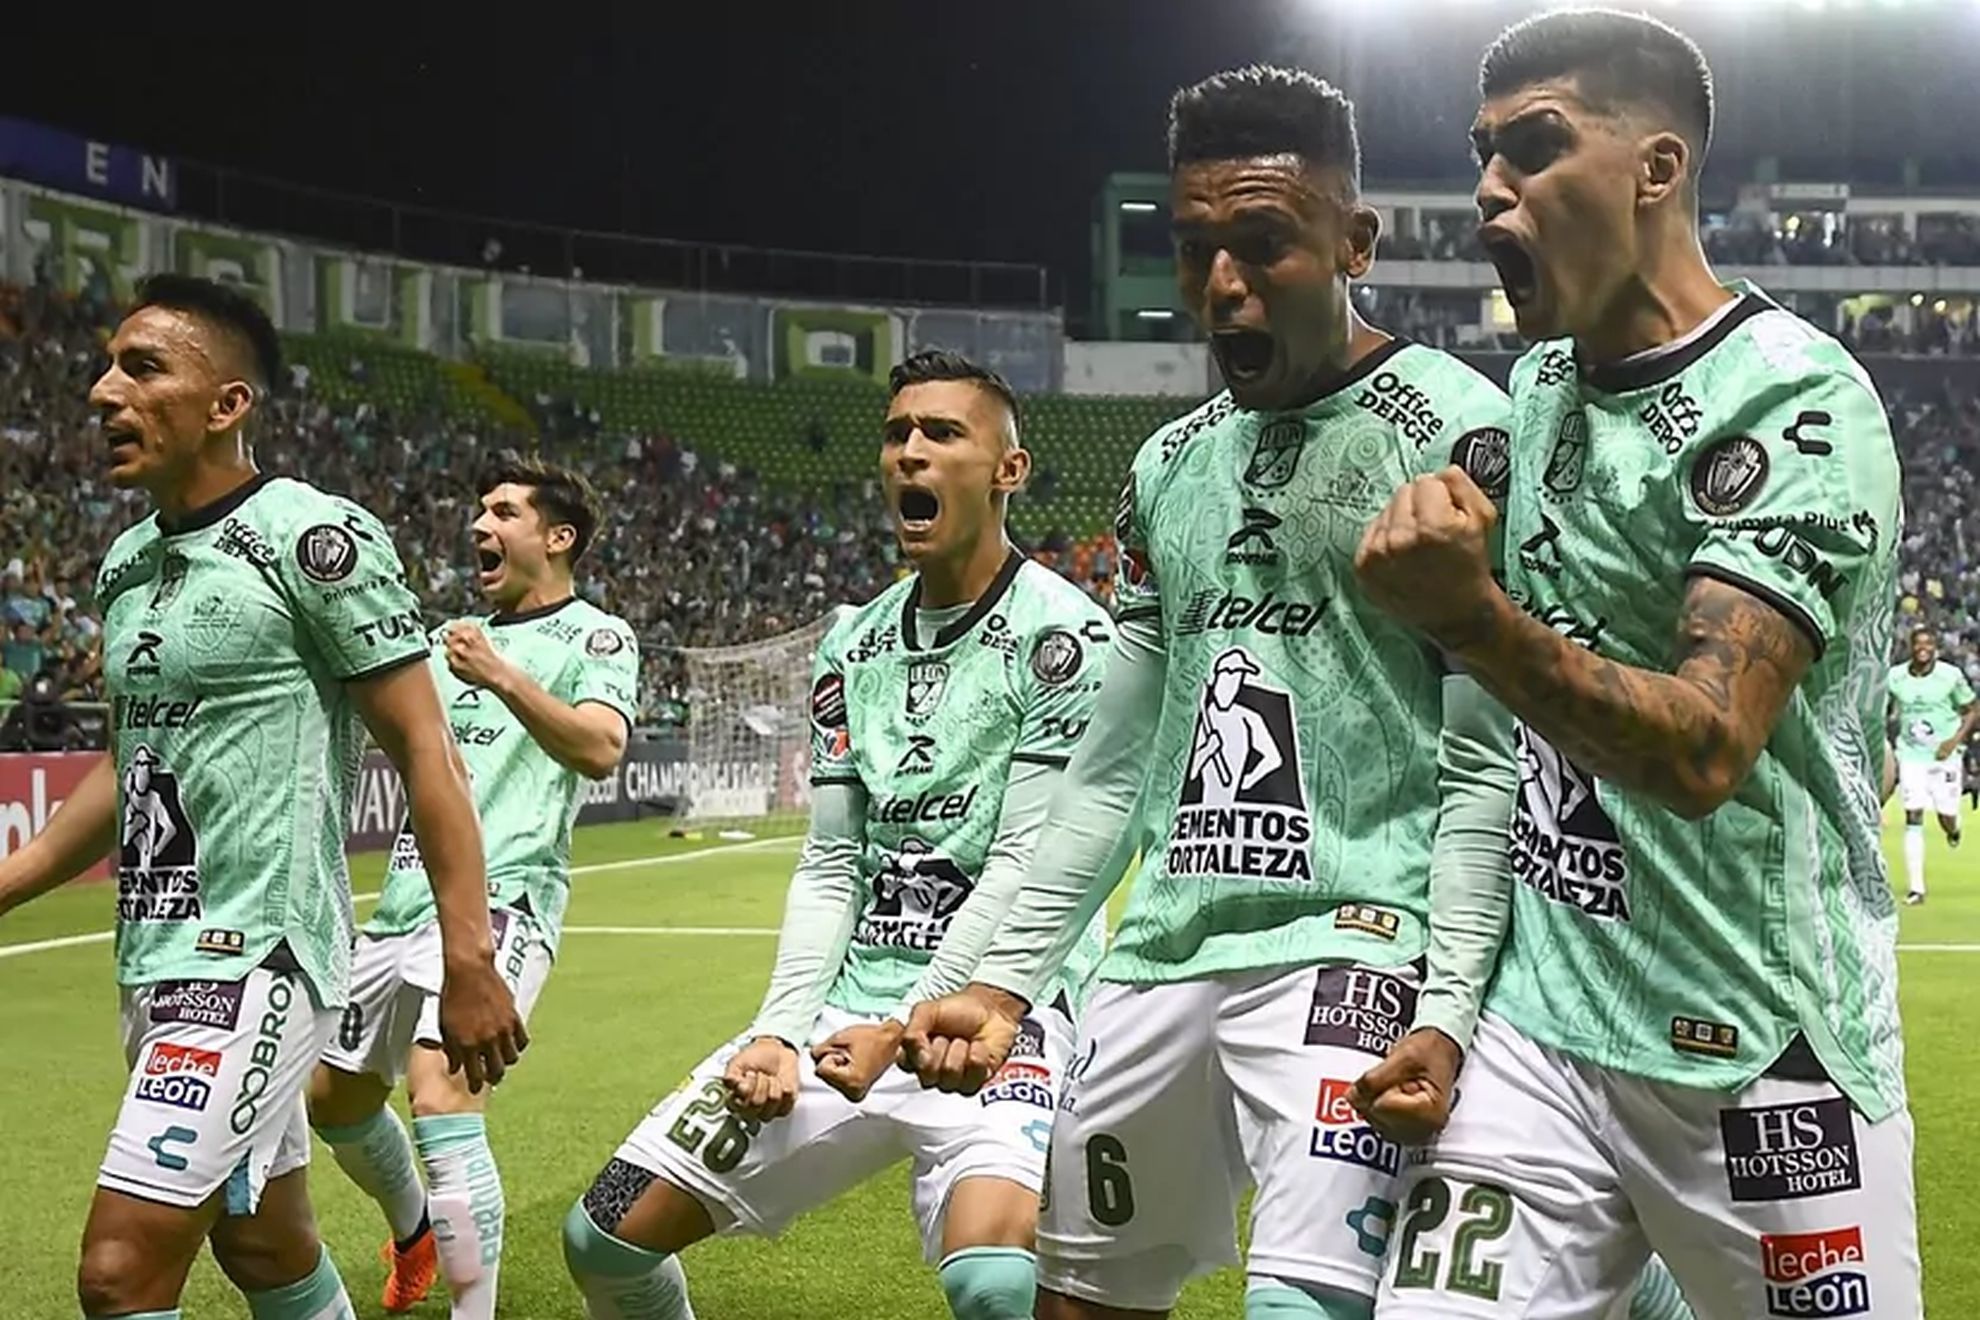 Leon defeat Carlos Vela's LAFC in Concacaf Champions League final first leg